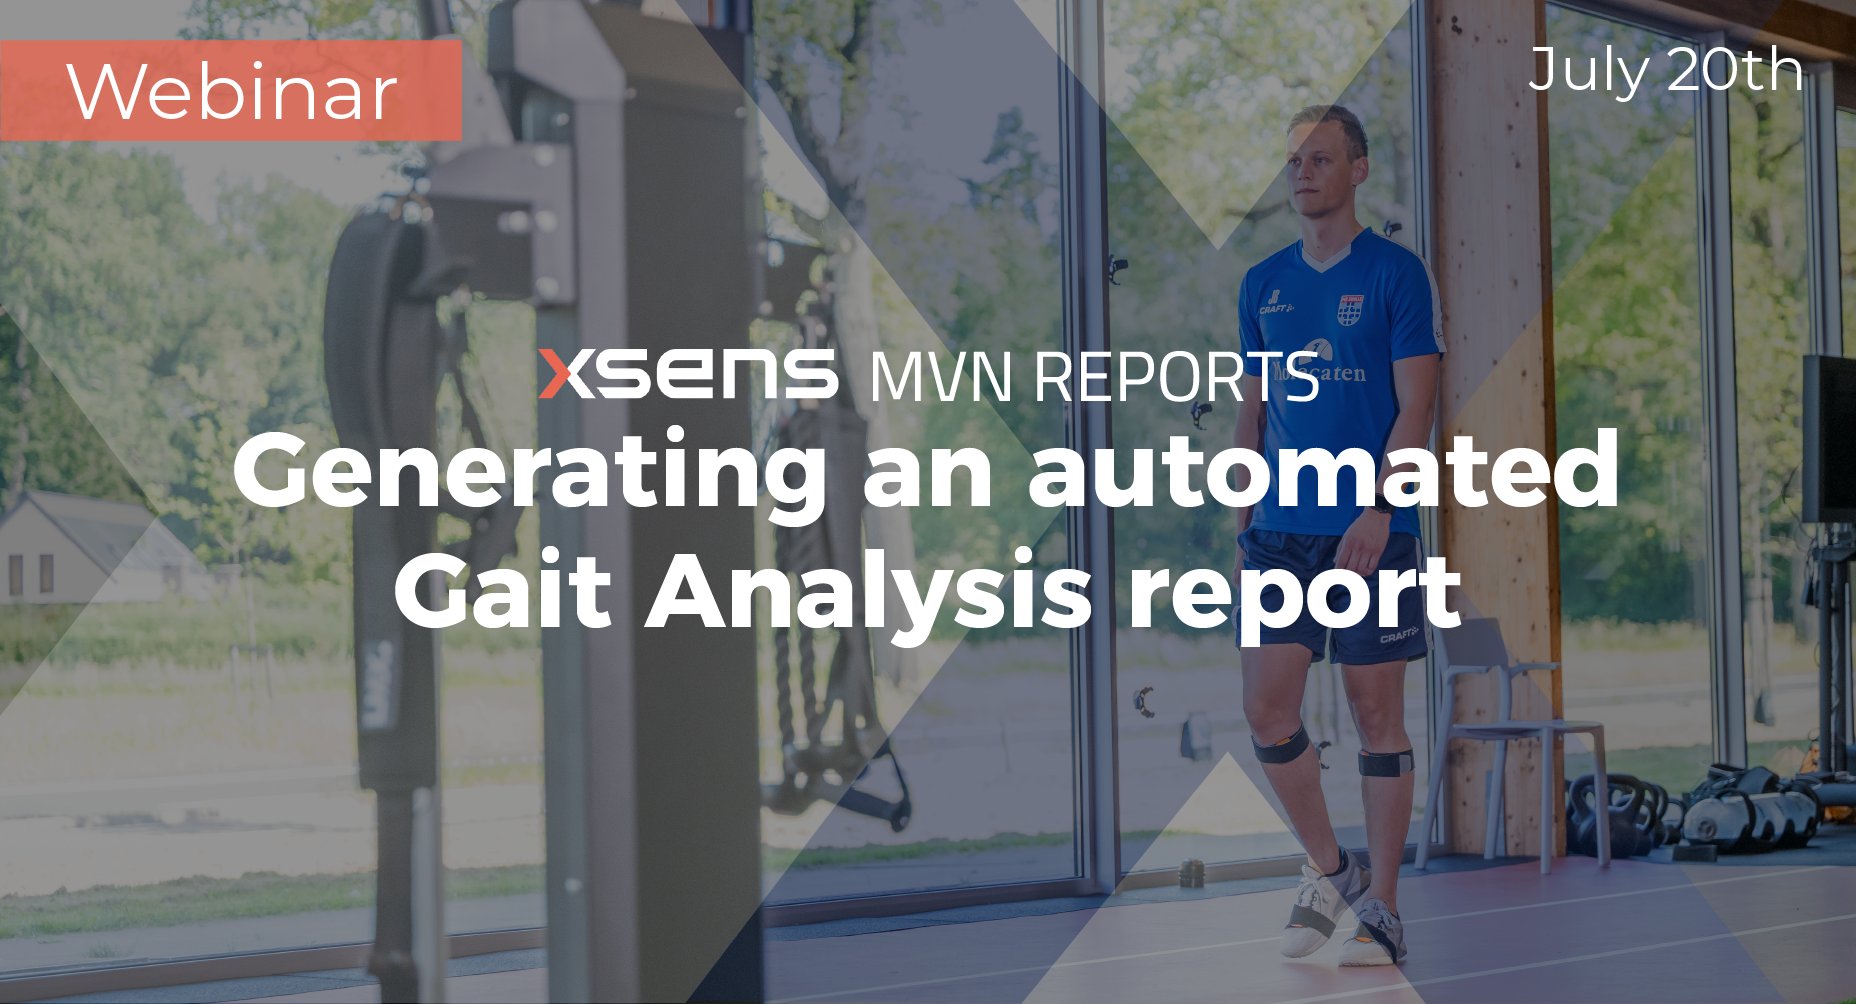 How to generate an automated Gait Analysis with MVN Reports